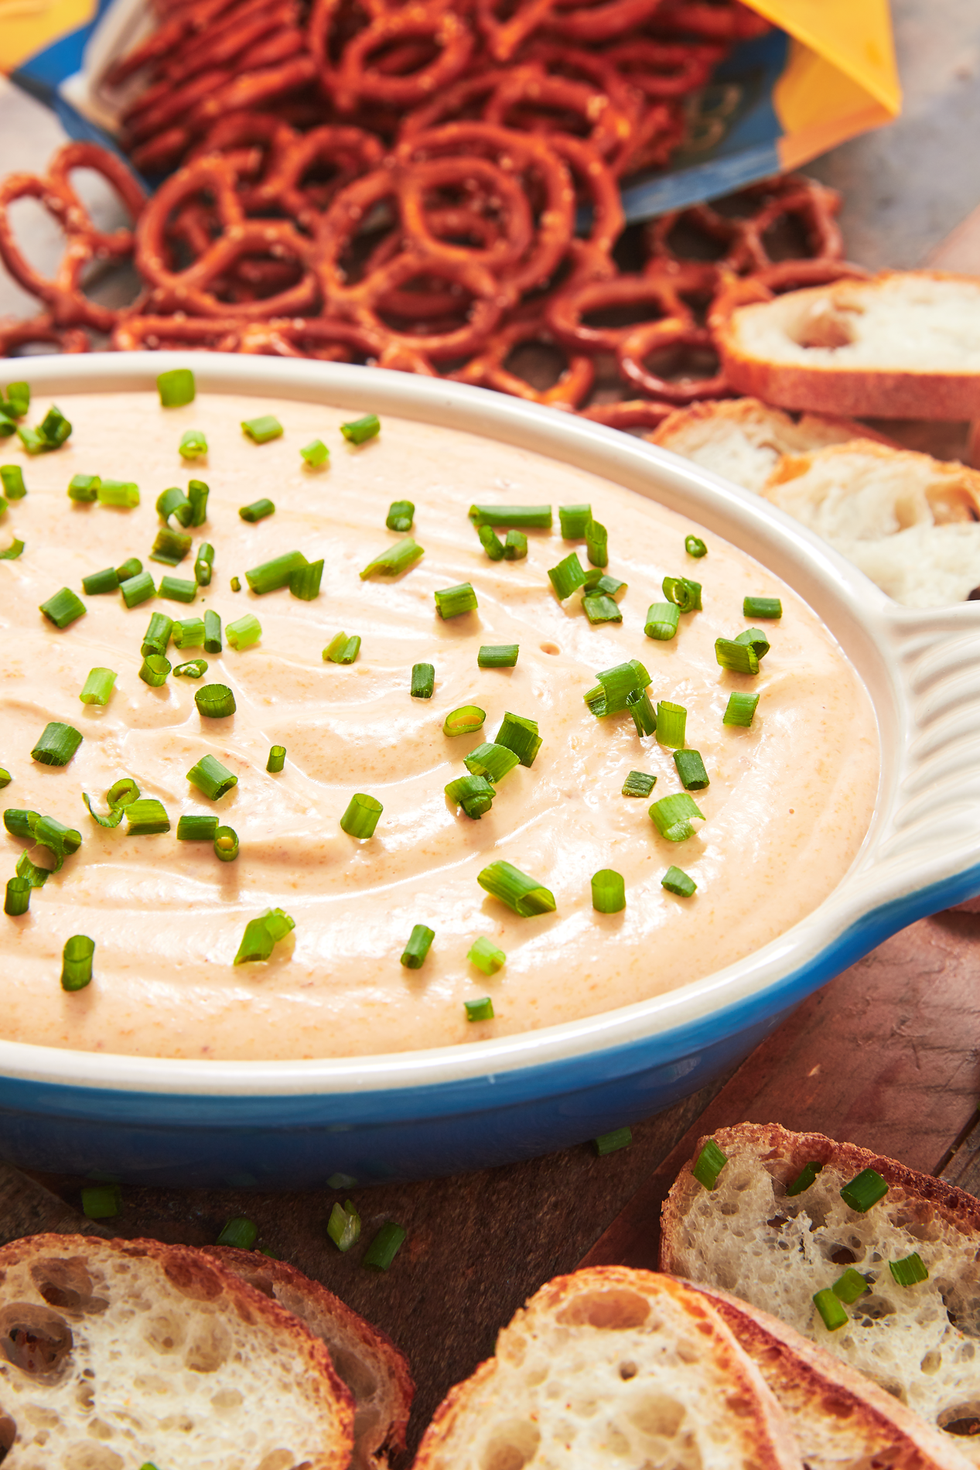 15 Slow Cooker Dip Recipes for Parties - Slow Cooker Gourmet